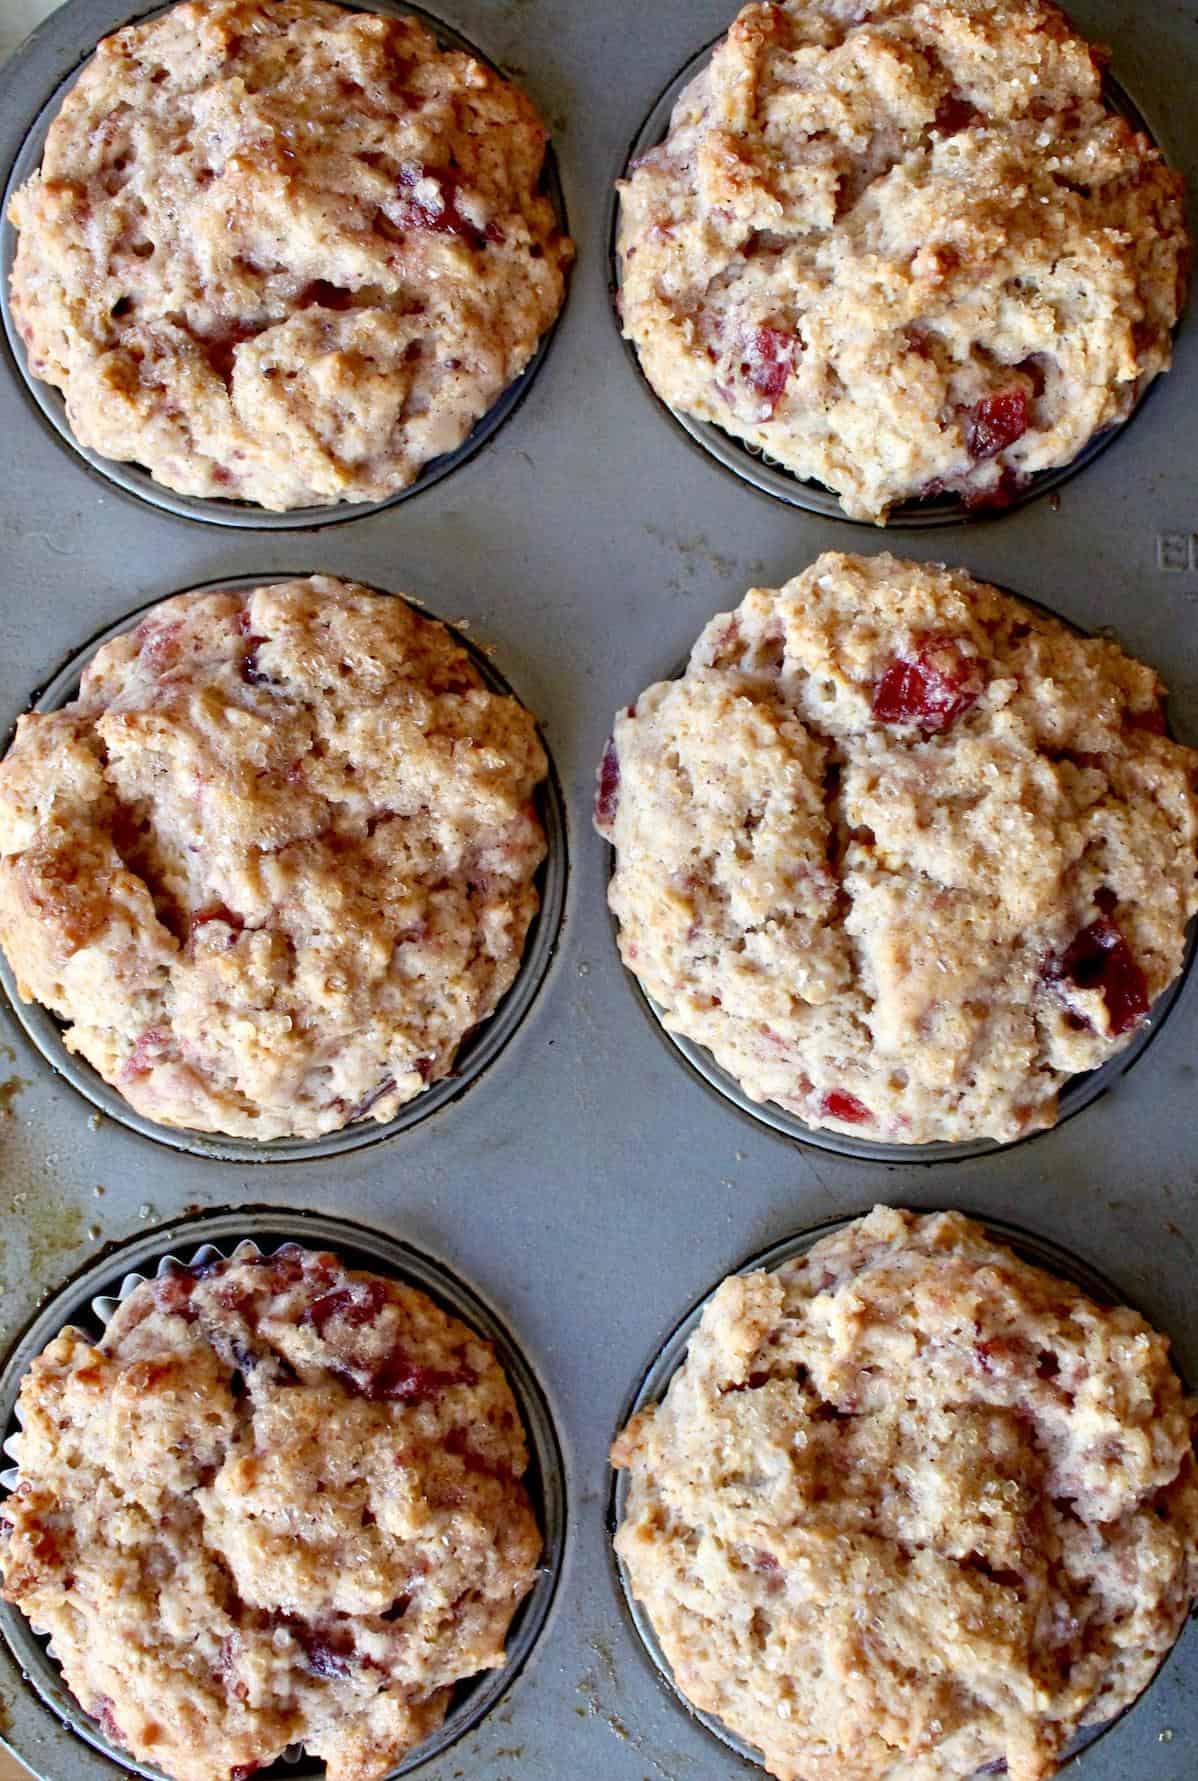  Enjoy these muffins as a snack or pair with your morning coffee for a delightful experience.